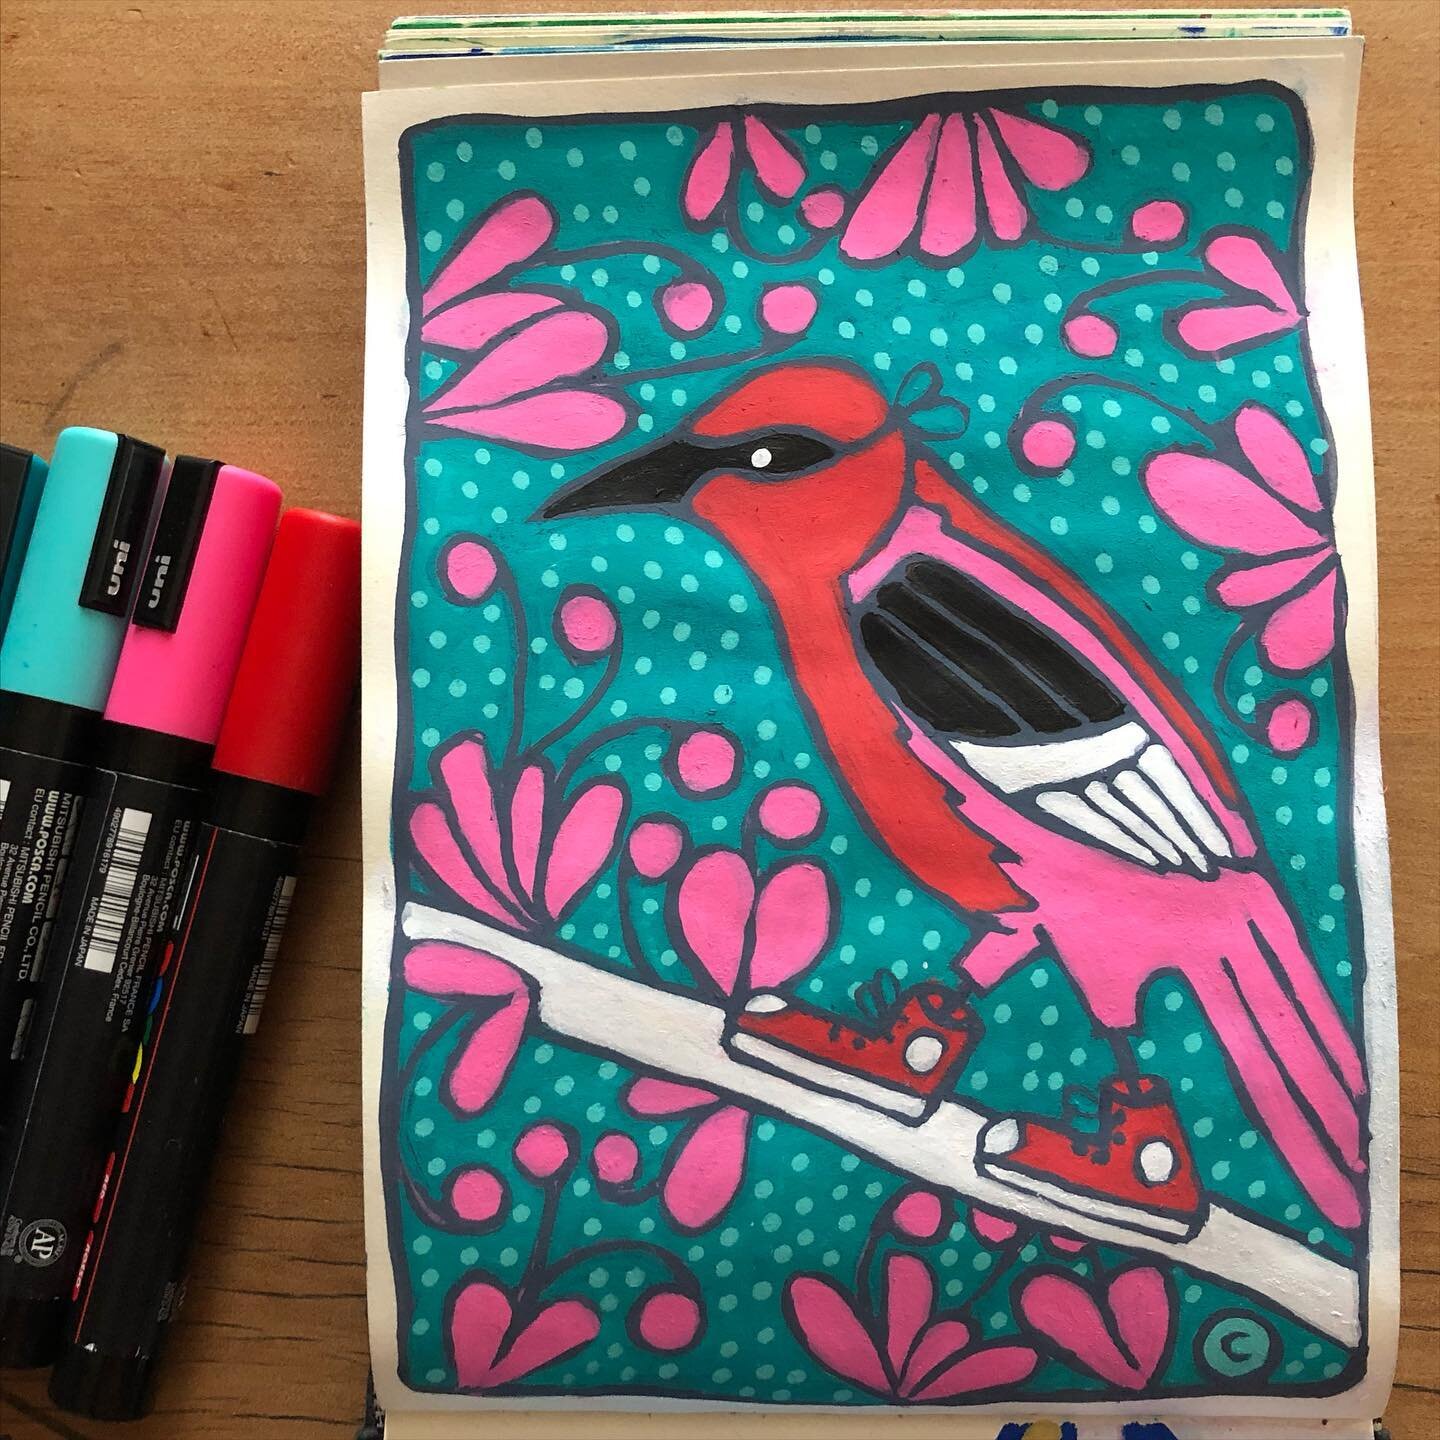 Scarlet honeyeater, spotted by Grandpa. The teeny little dude was out and about in Mollymook NSW.

#posca  #poscapens #poscaart #illustration #dailyart #dailyillustration